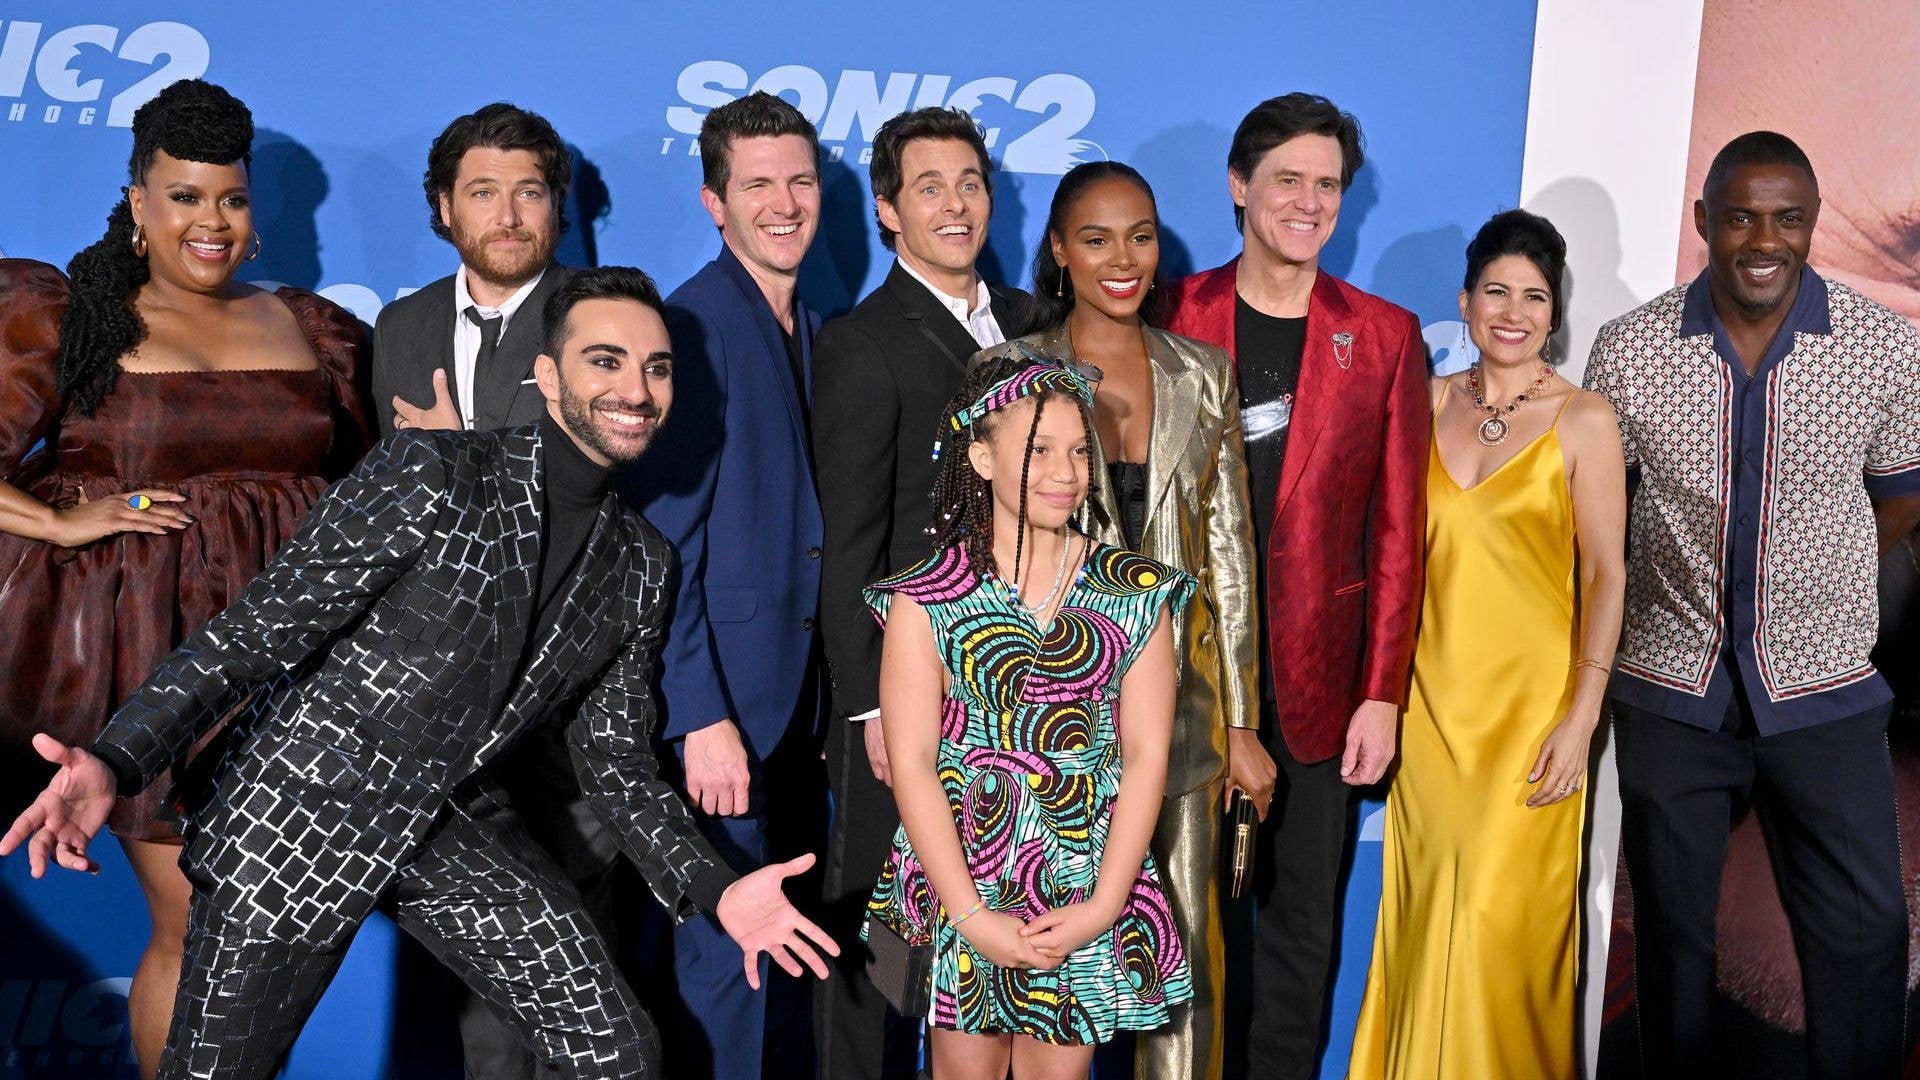 Cast of 'Sonic 2' at the film's premiere